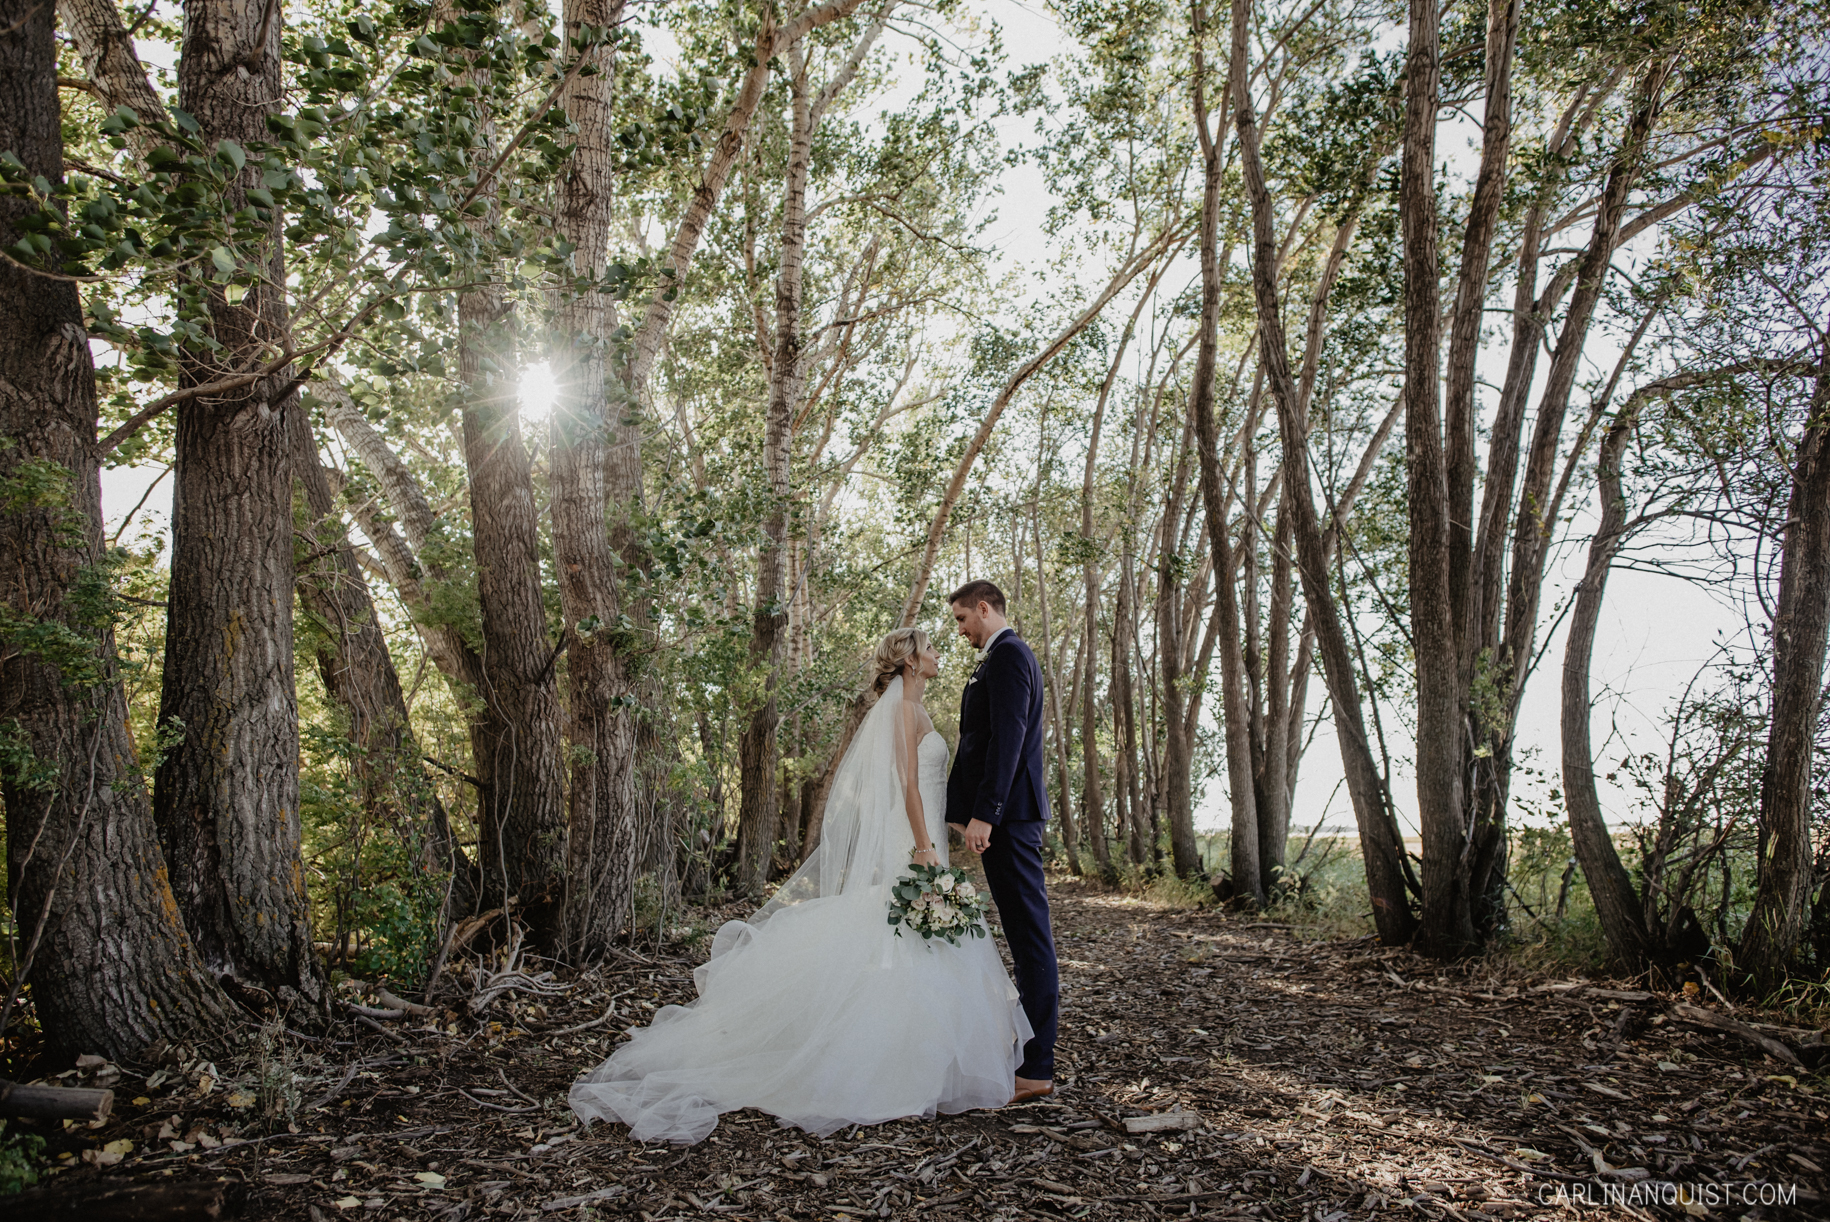 Bride & Groom in the Trees | Olds Wedding Photographer